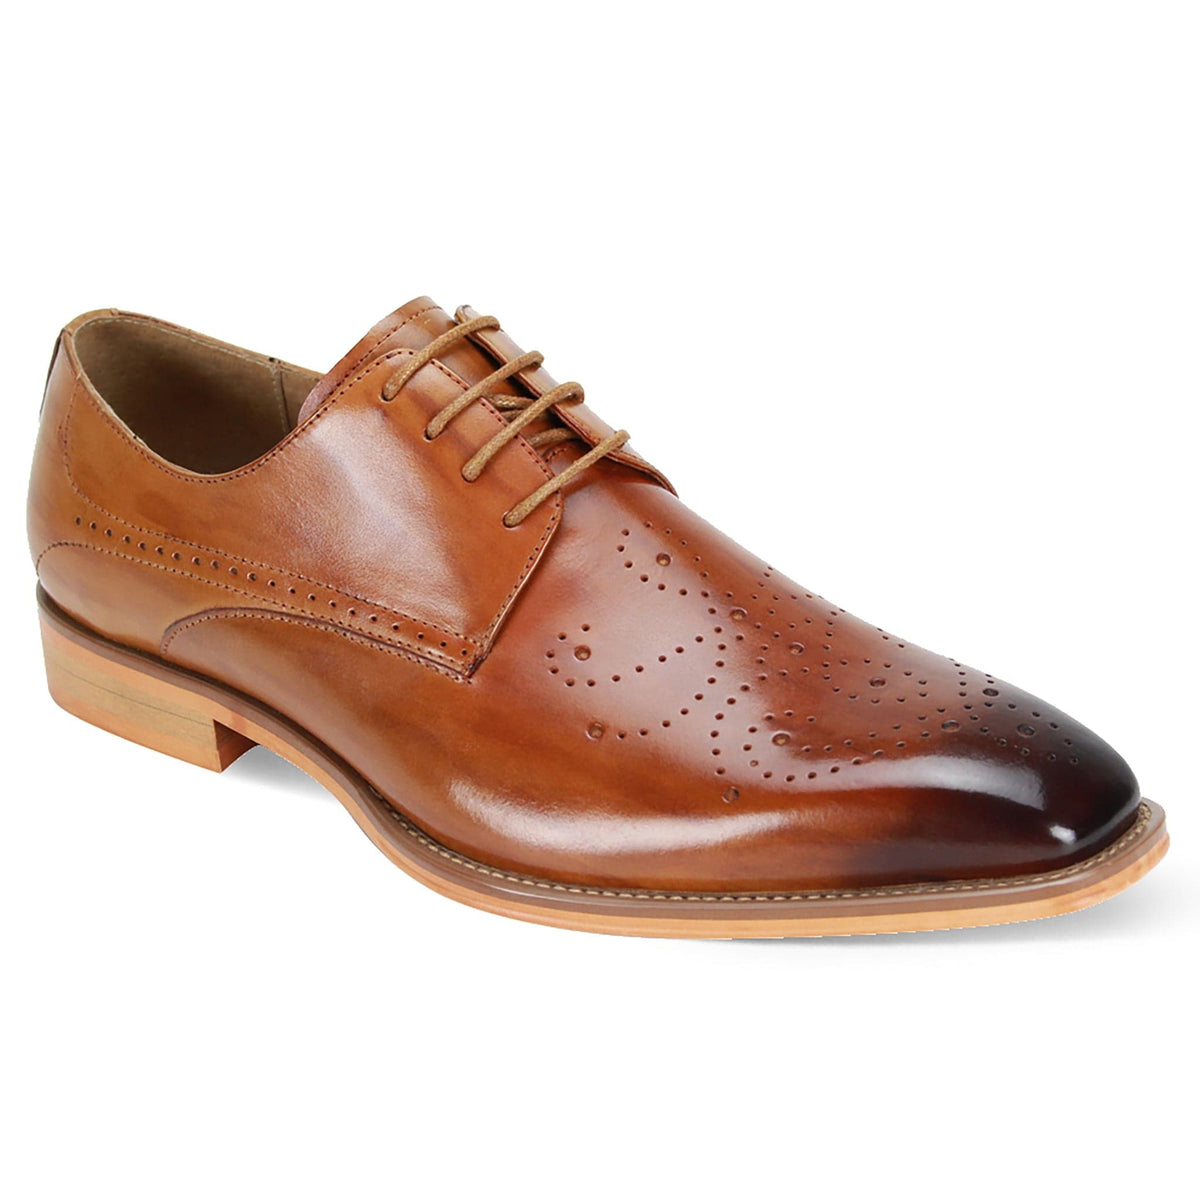 GIOVANNI LEATHER SHOES FT TAN / 7 GIOVANNI LEATHER SHOES-JOEL